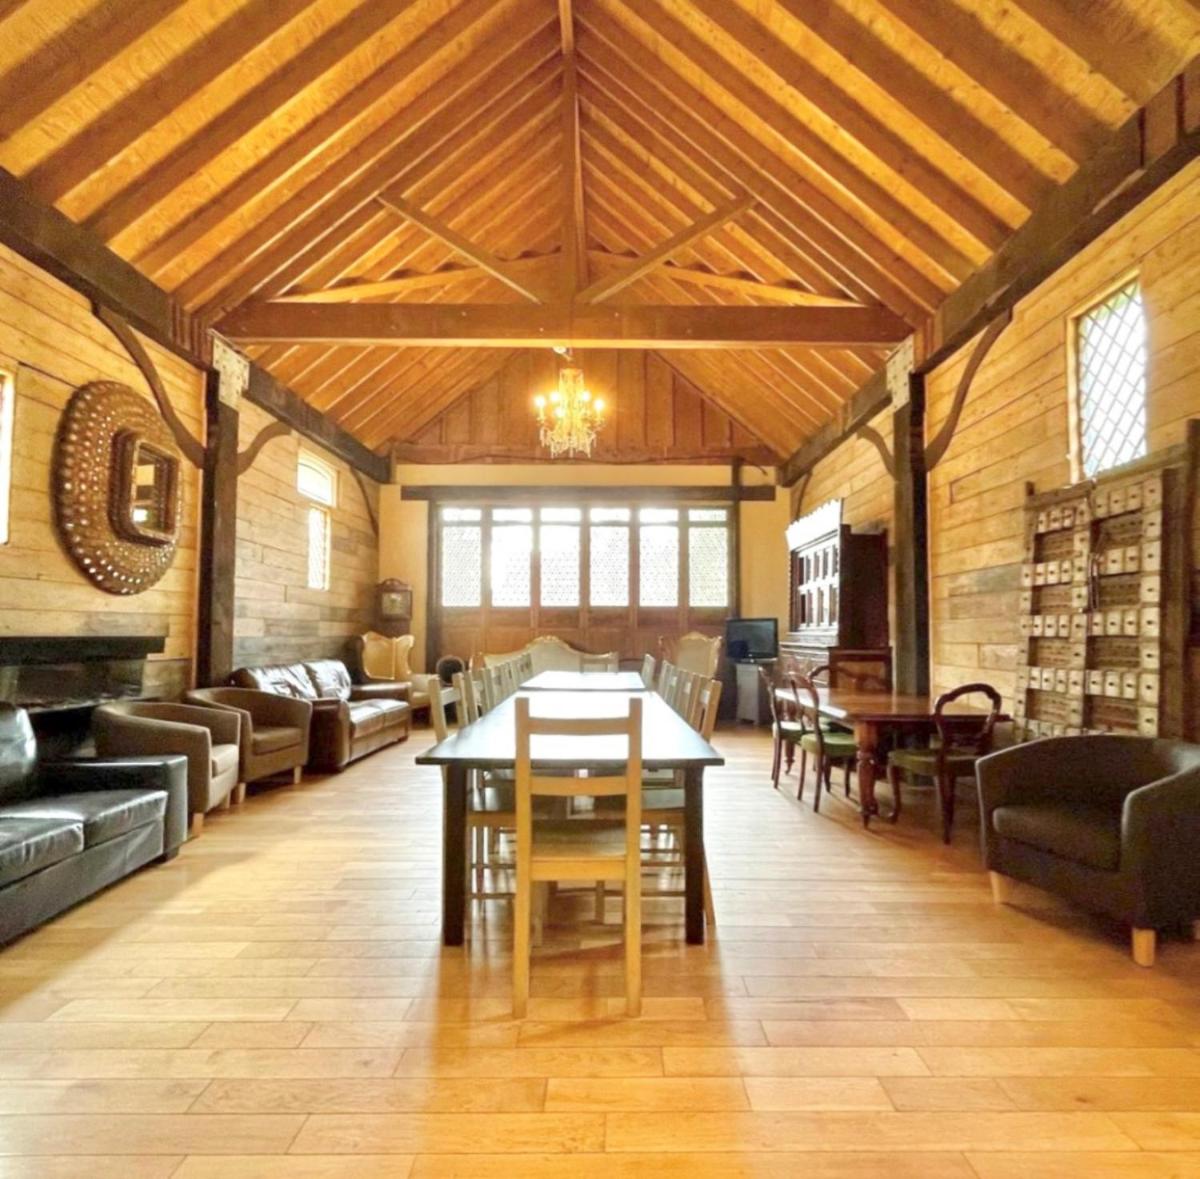 The Timber Barn South Downs West Sussex Sleeps 18 - Housity